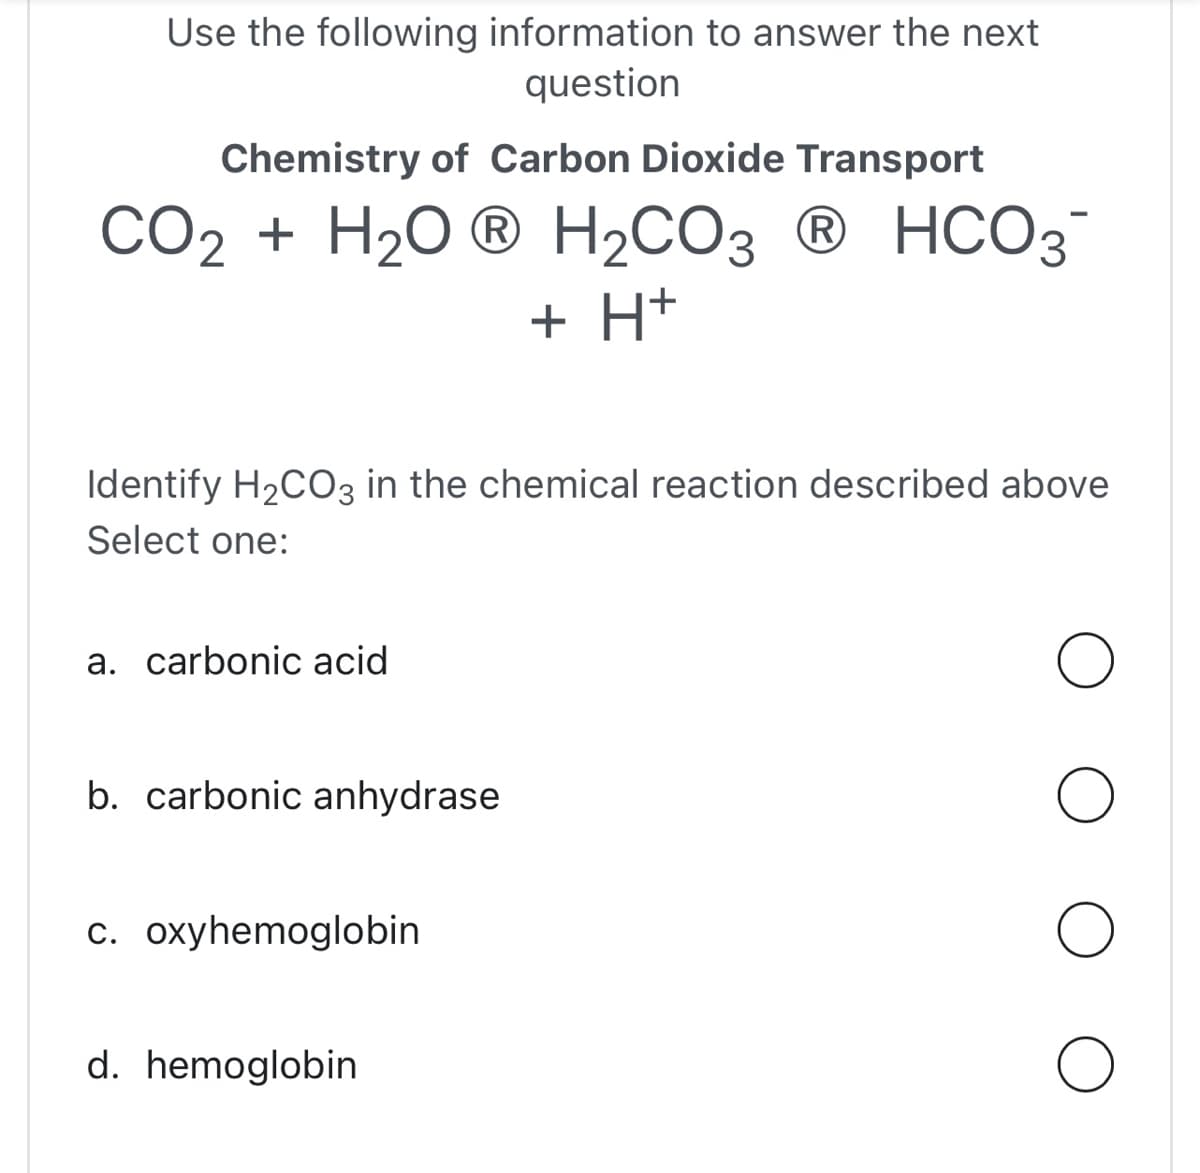 Use the following information to answer the next
question
Chemistry of Carbon Dioxide Transport
CO₂ + H₂OⓇ H₂CO3 Ⓡ HCO3-
+ H+
Identify H₂CO3 in the chemical reaction described above
Select one:
a. carbonic acid
b. carbonic anhydrase
c. oxyhemoglobin
d. hemoglobin
O
O